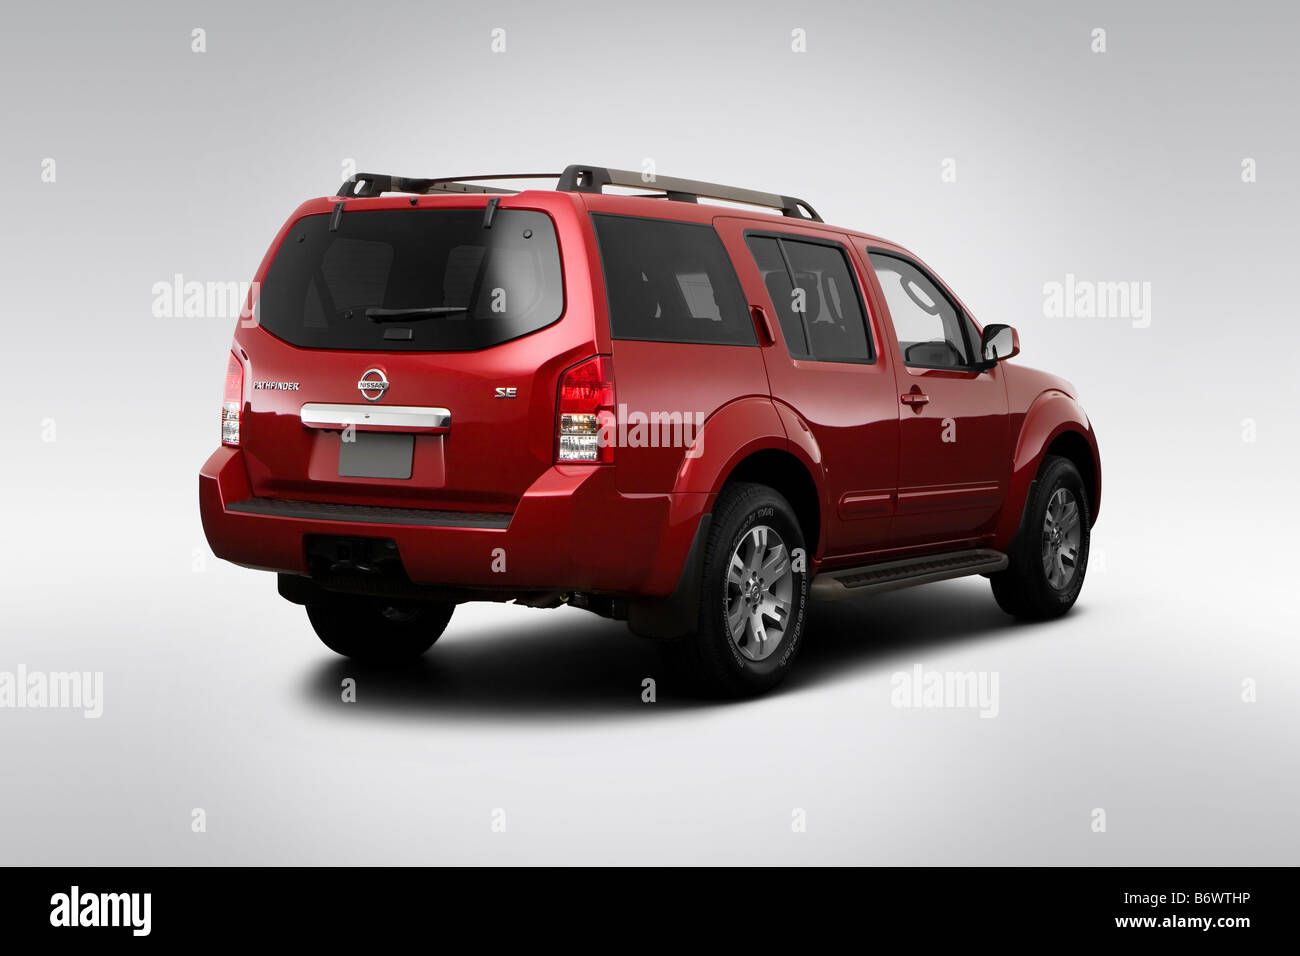 2009 Nissan Pathfinder SE in Red - Rear angle view Stock Photo